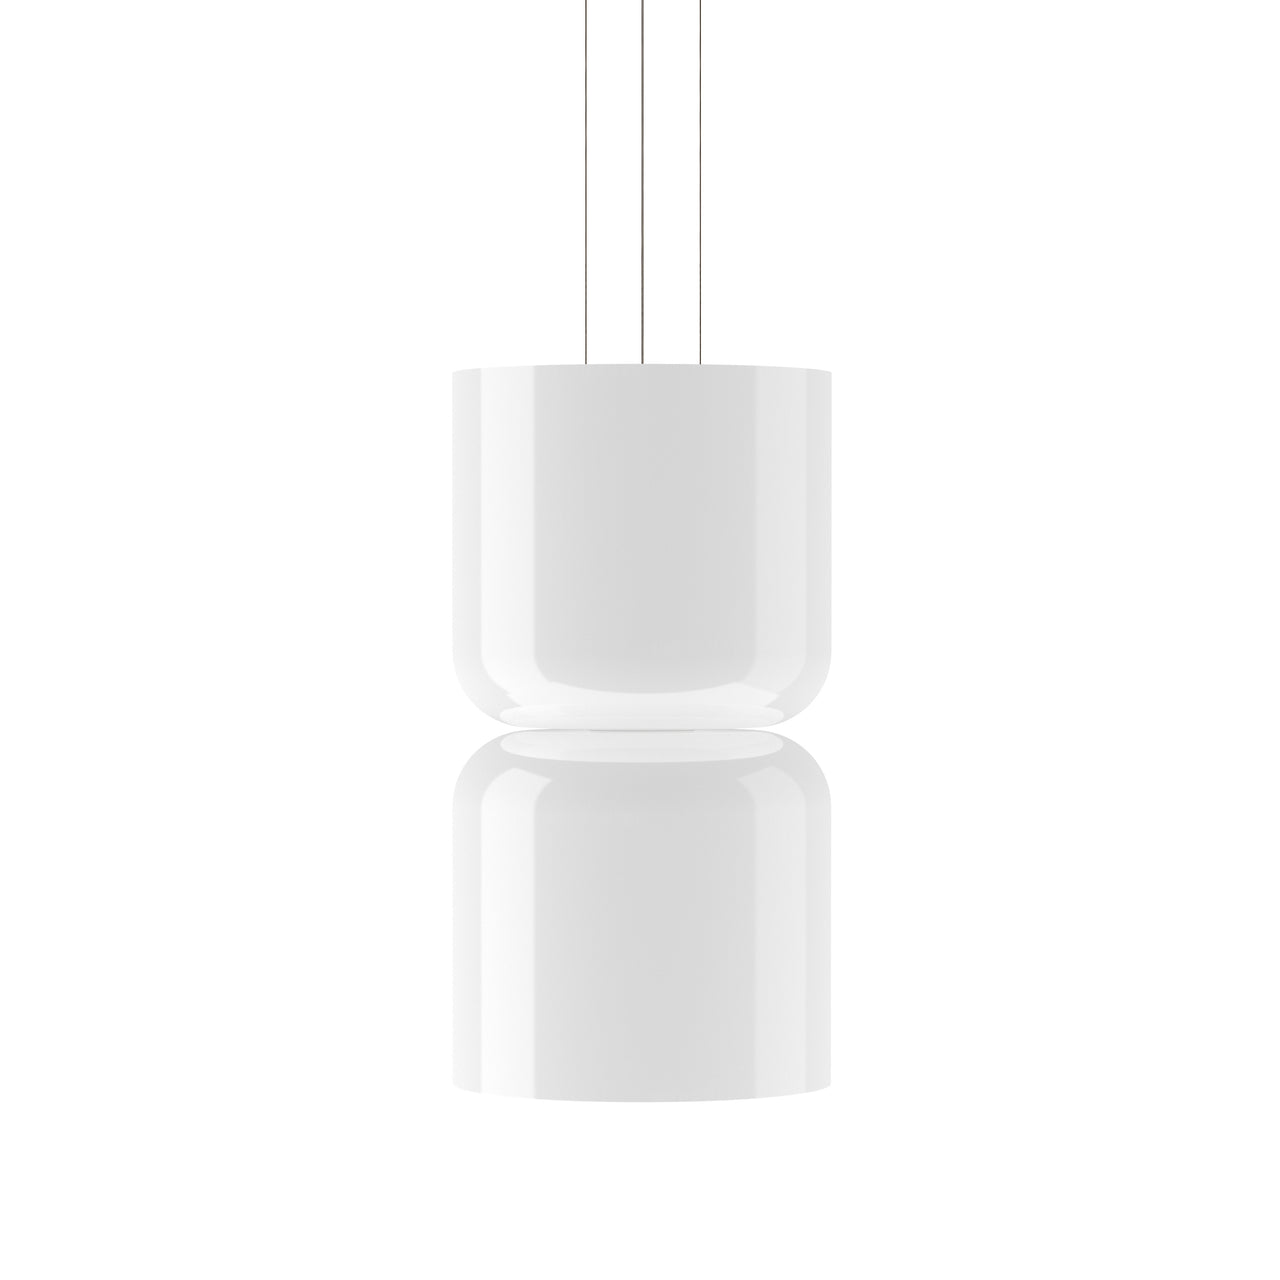 Totem Up + Downlight Pendant: A+A